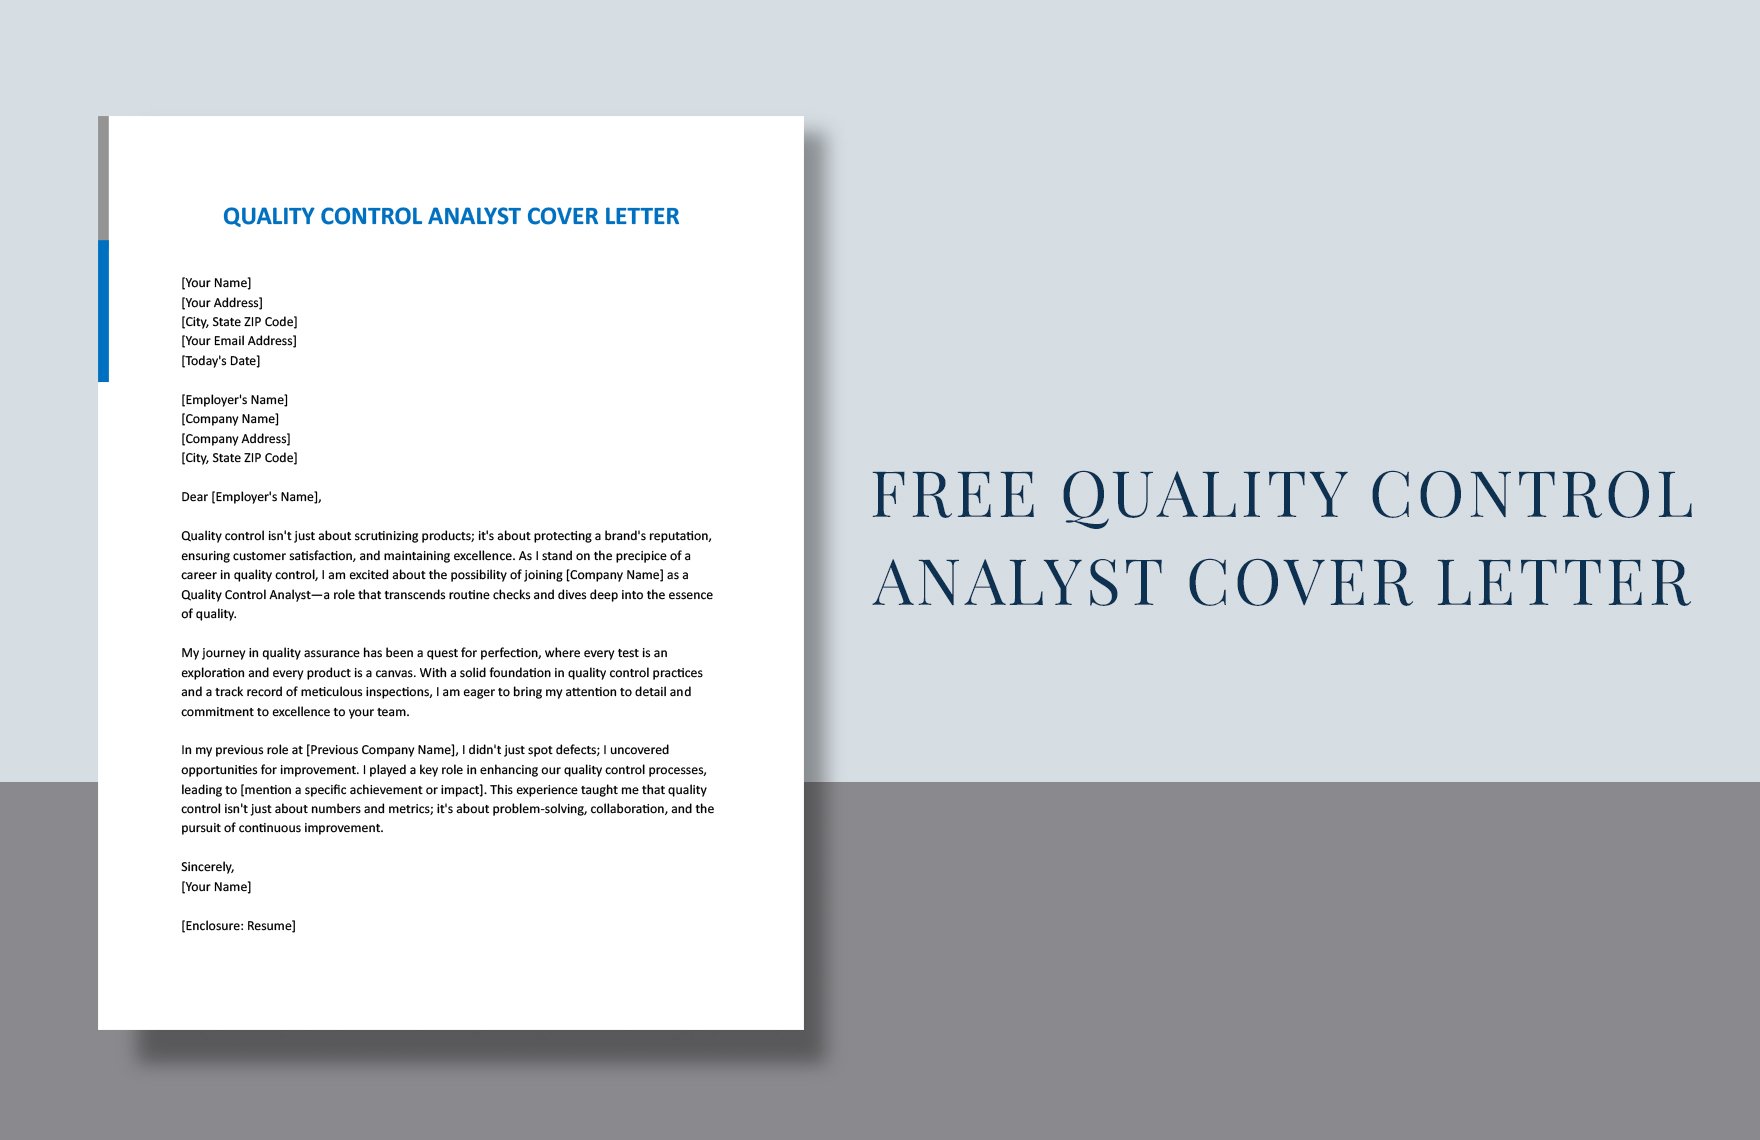 Quality Control Analyst Cover Letter